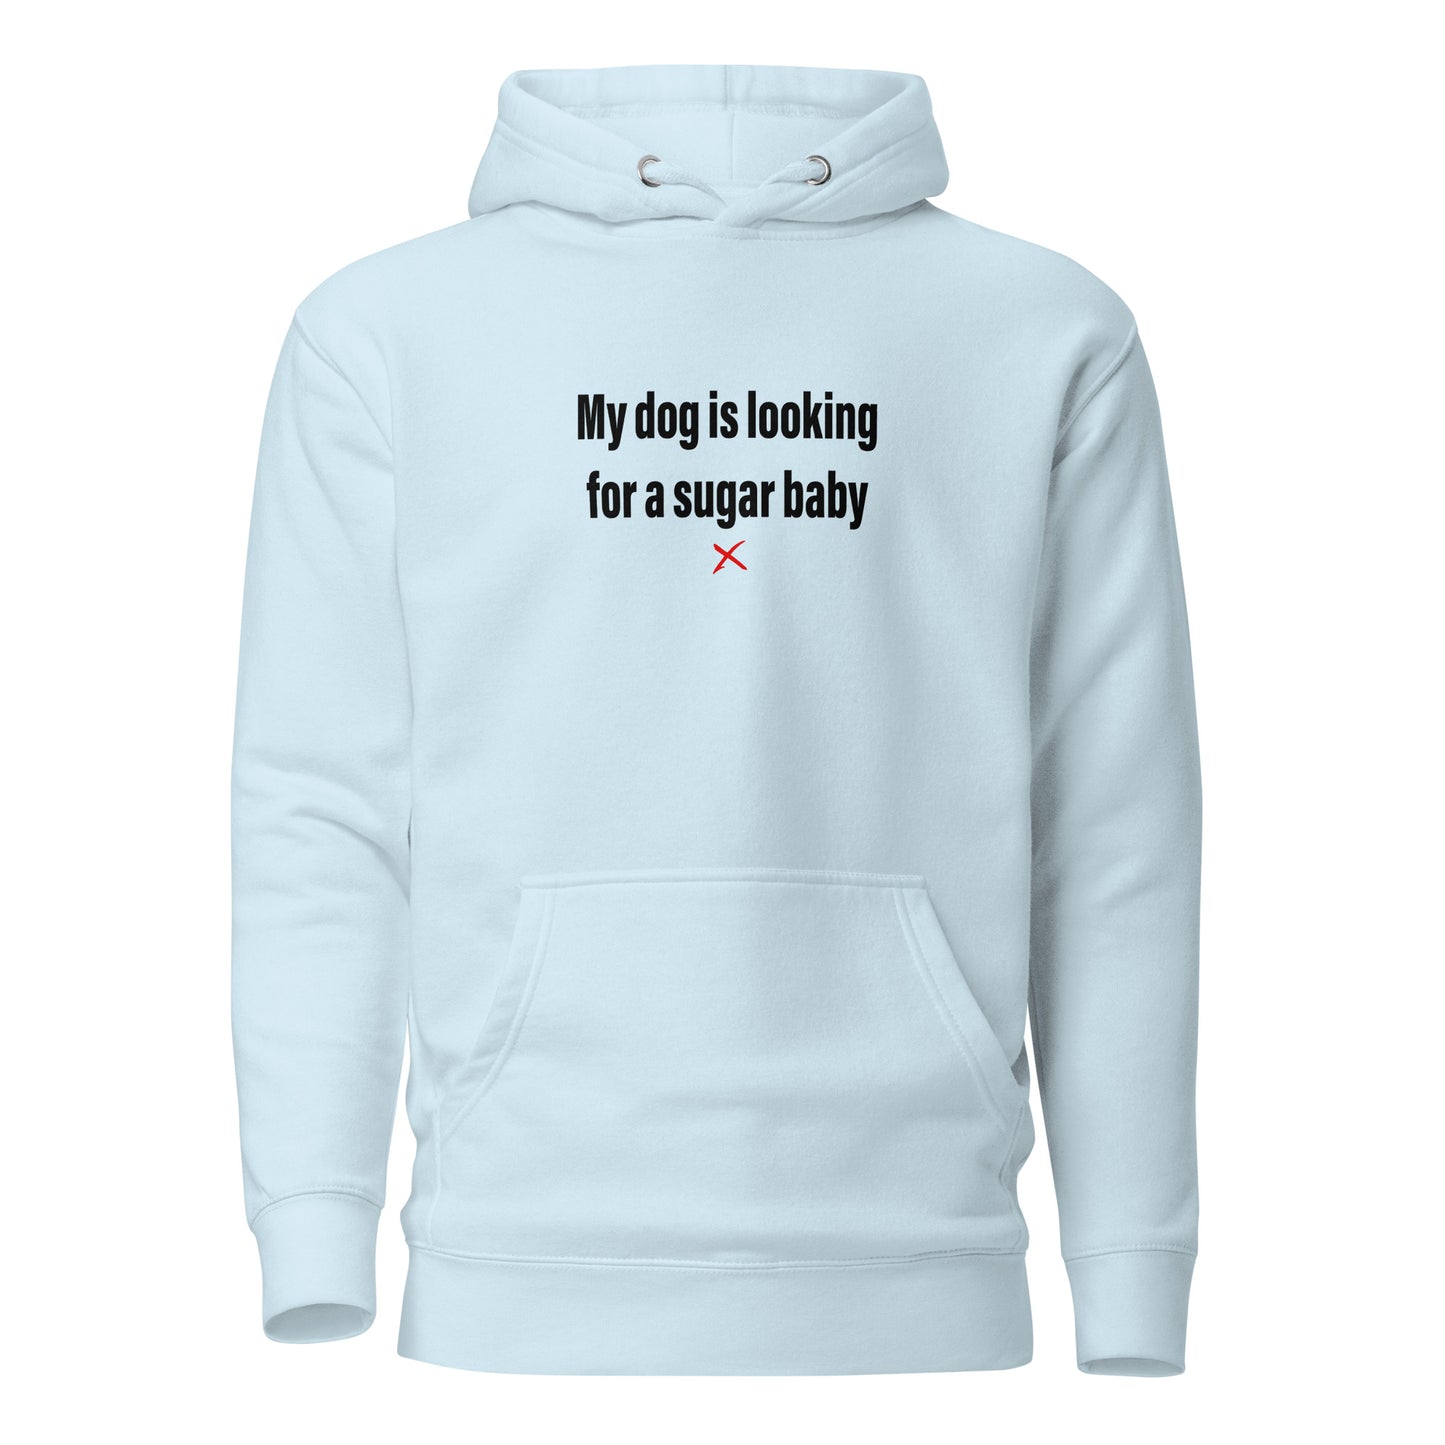 My dog is looking for a sugar baby - Hoodie